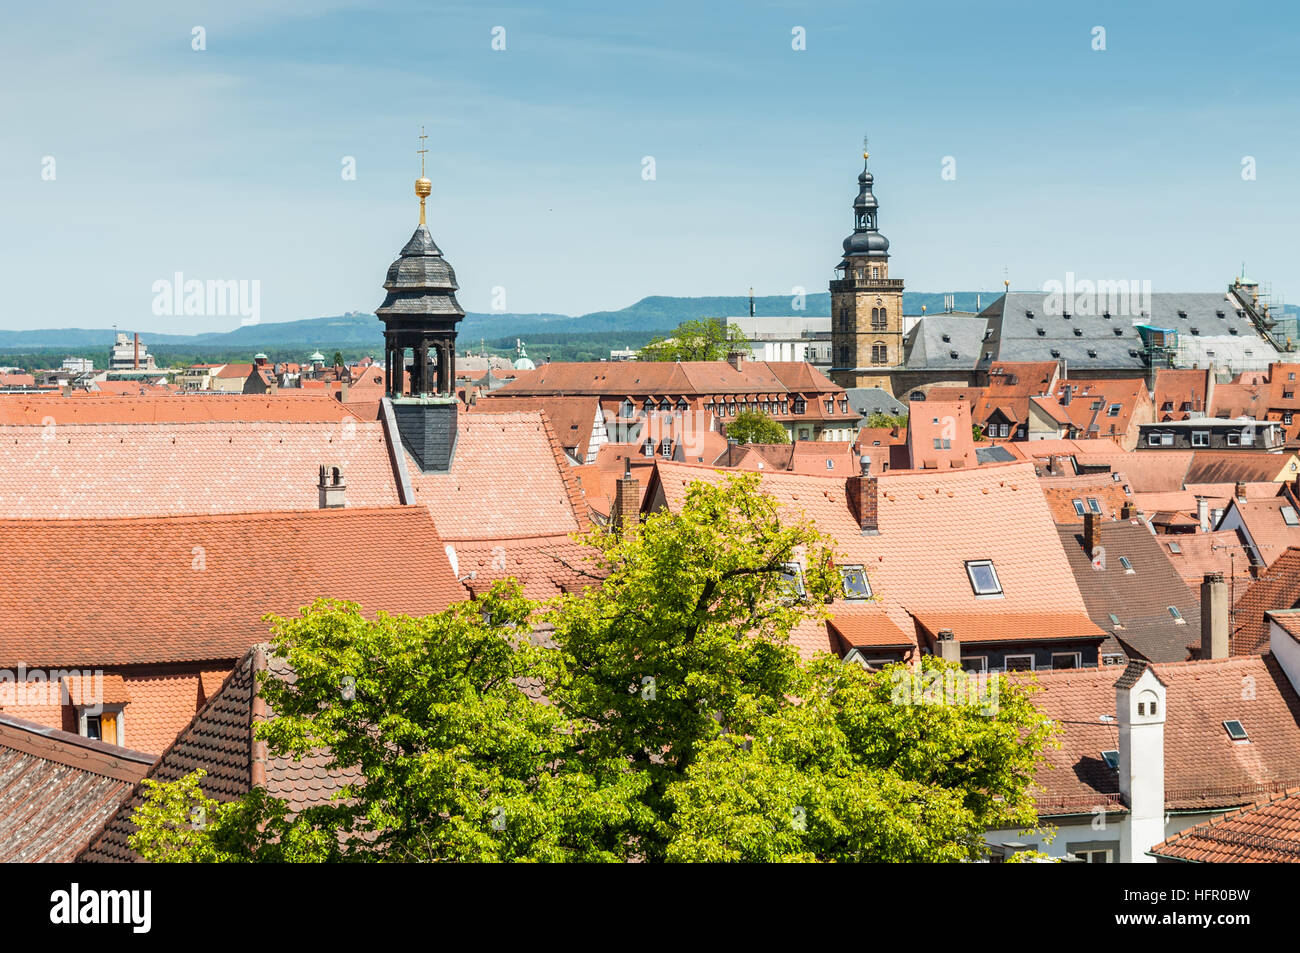 View over the old town of Bamberg, Germany. Historic city center of Bamberg is a listed UNESCO world heritage site. Stock Photo